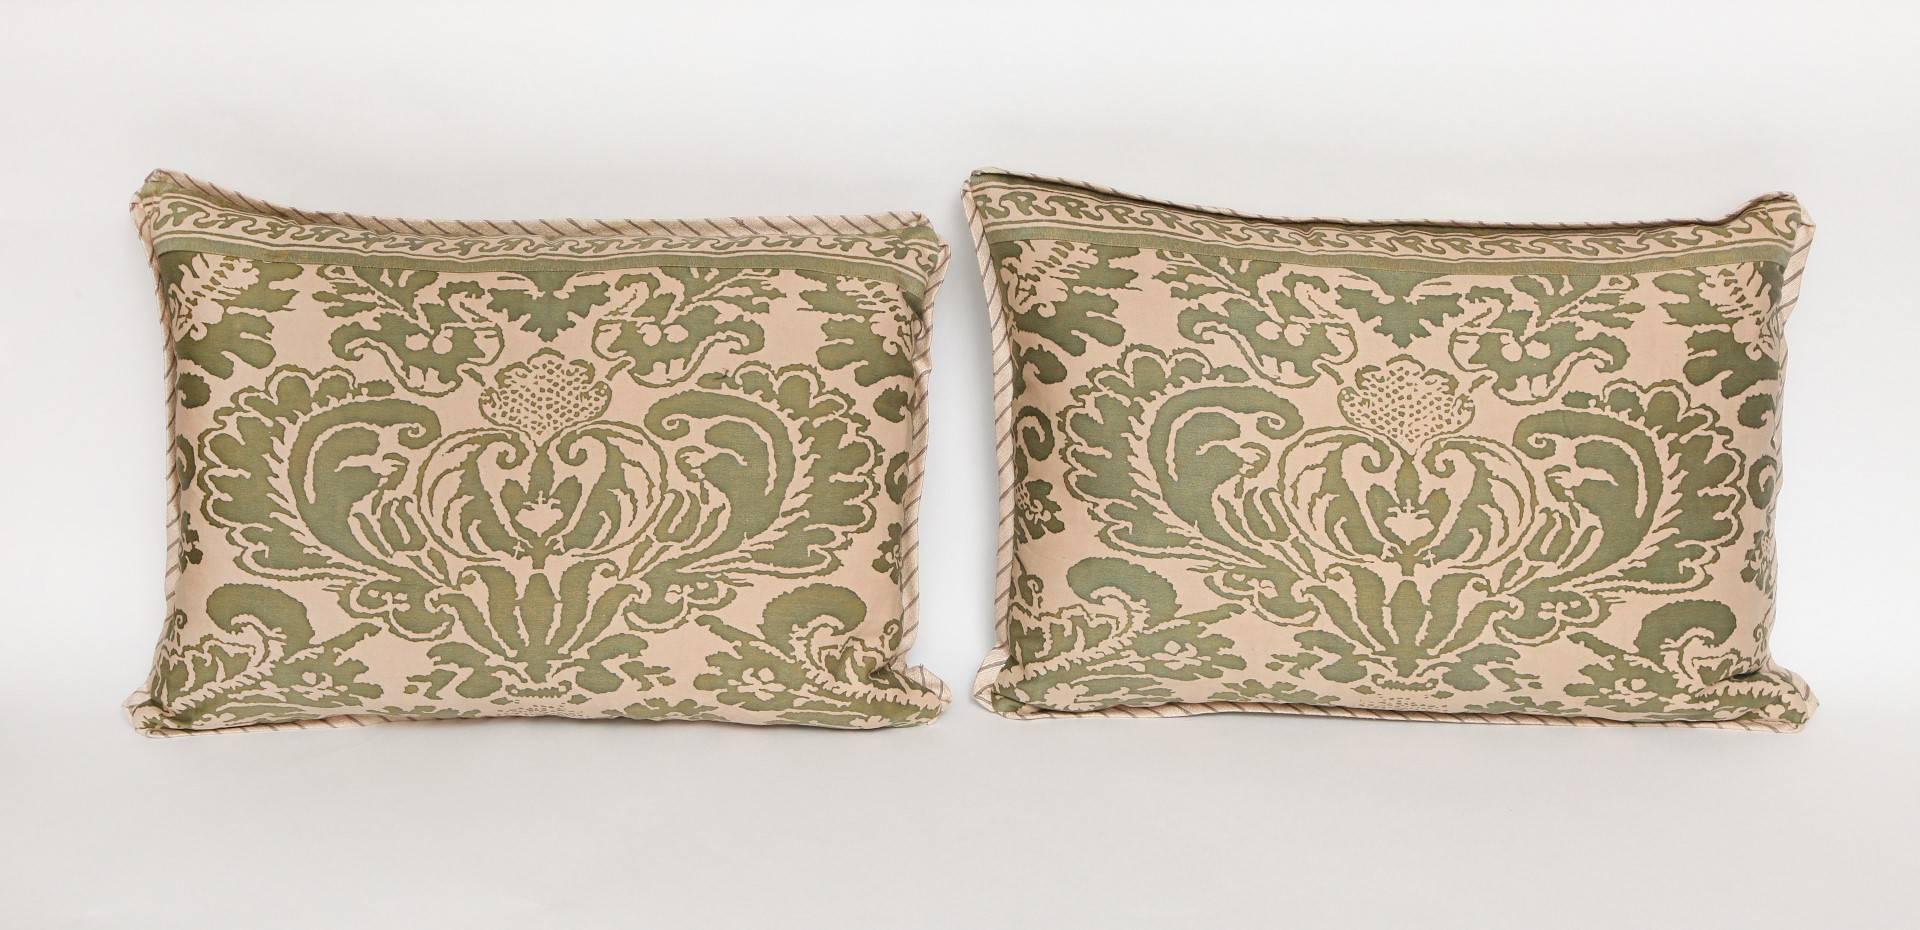 A pair of Fortuny fabric cushions in the Sevigne pattern, rectangular shape, silk backings and bias silk edging, the pattern, as 17th century French design named after Madame de Sevigne. 
50 down/50 feather insert
Newly made using vintage Fortuny